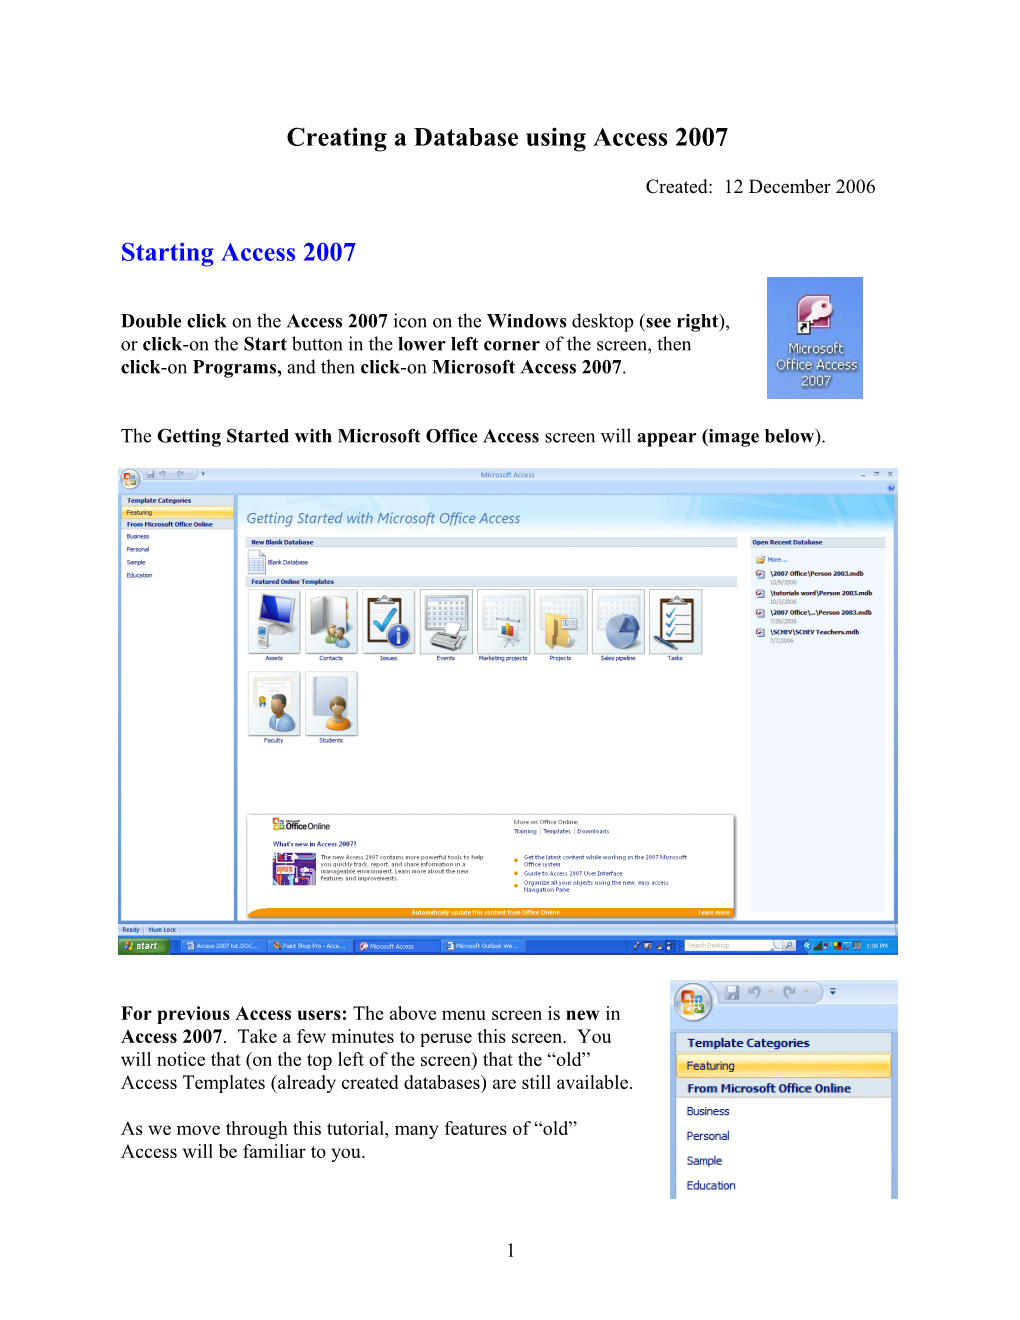 Creating a Database Using Access 2007